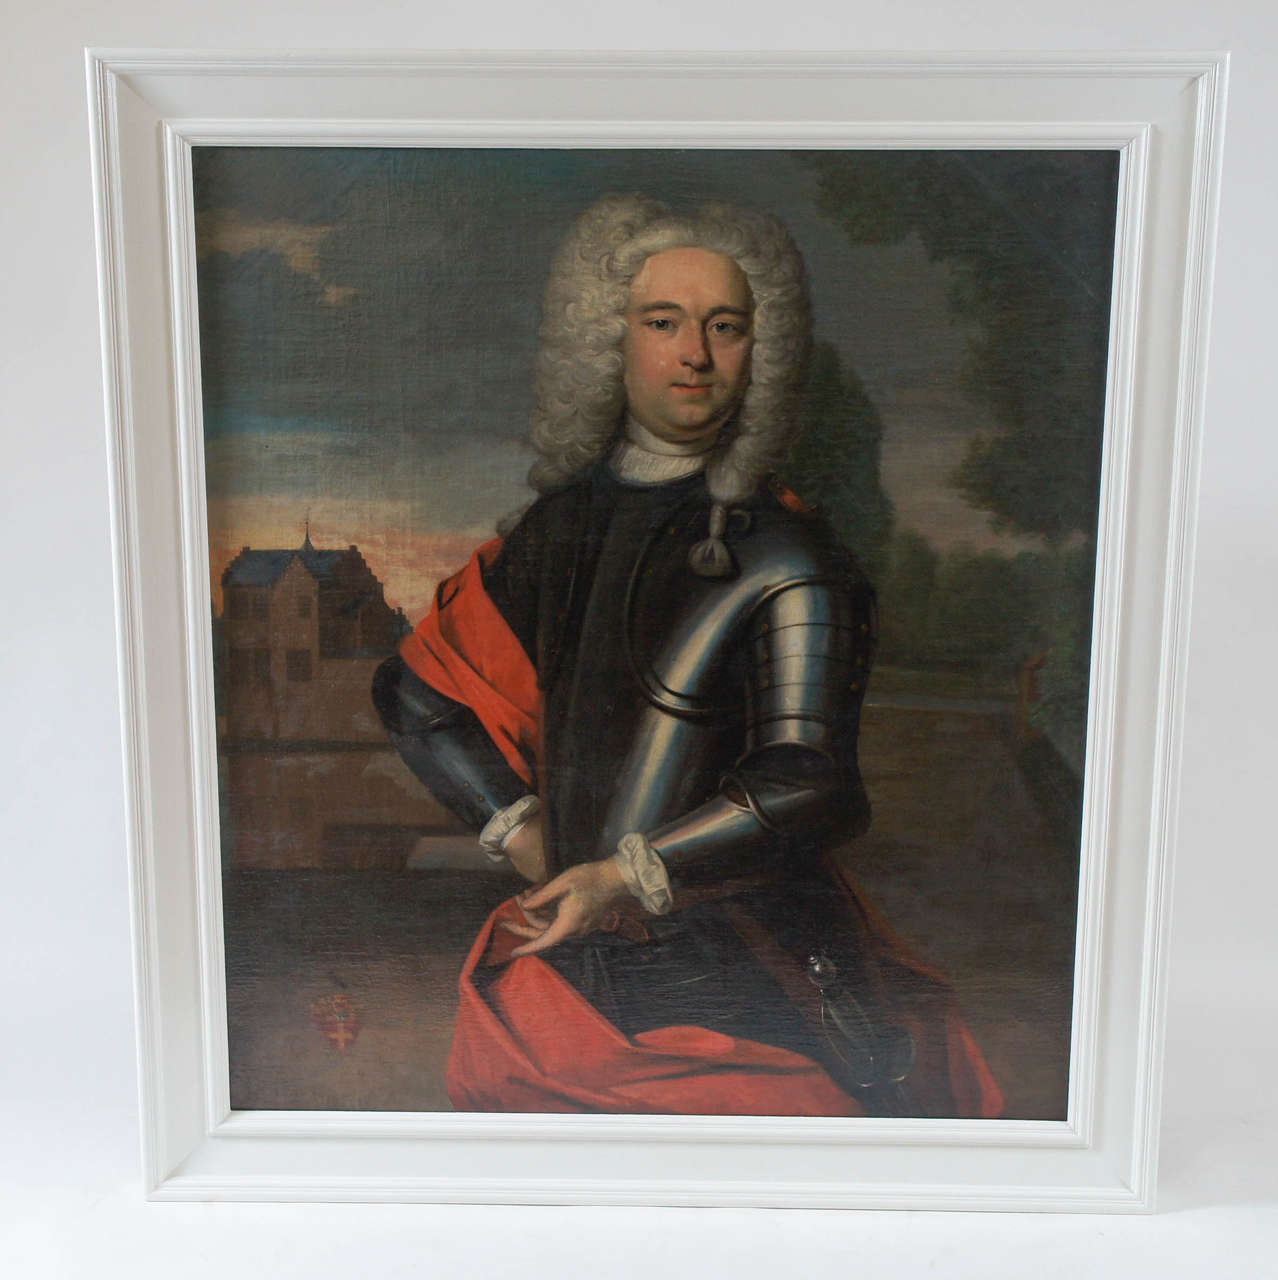 Exceptional quality oil on canvas portrait painting of a bewigged Dutch statesman in armour having architectural background of ancestral seat with heraldic crest at lower left. Later inscription to the reverse of period relined-canvas giving